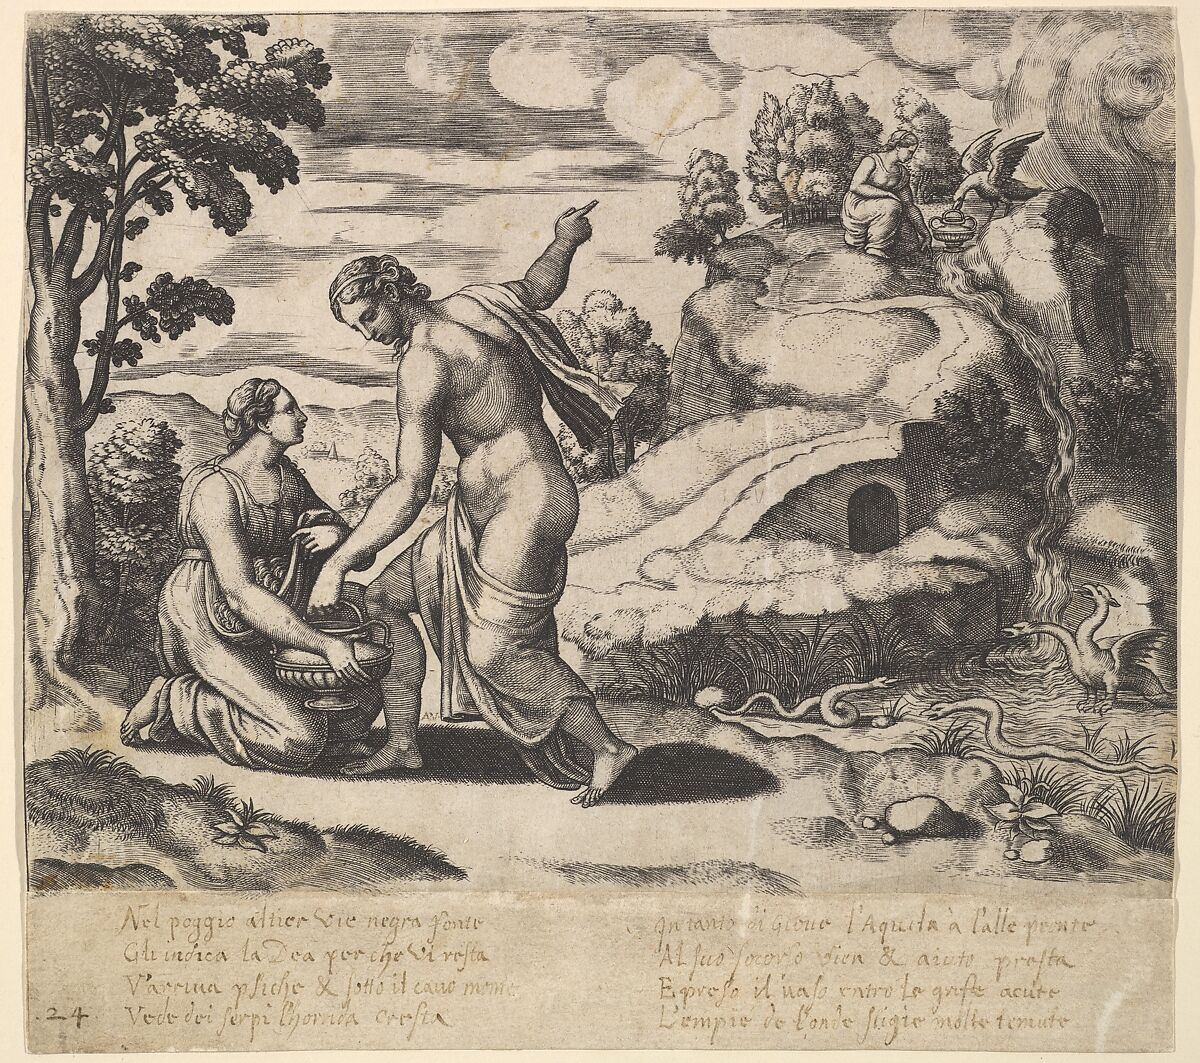 Venus ordering Psyche to take water from a fountain guarded by dragons, from "Fable of Cupid and Psyche", Master of the Die (Italian, active Rome, ca. 1530–60), Engraving 